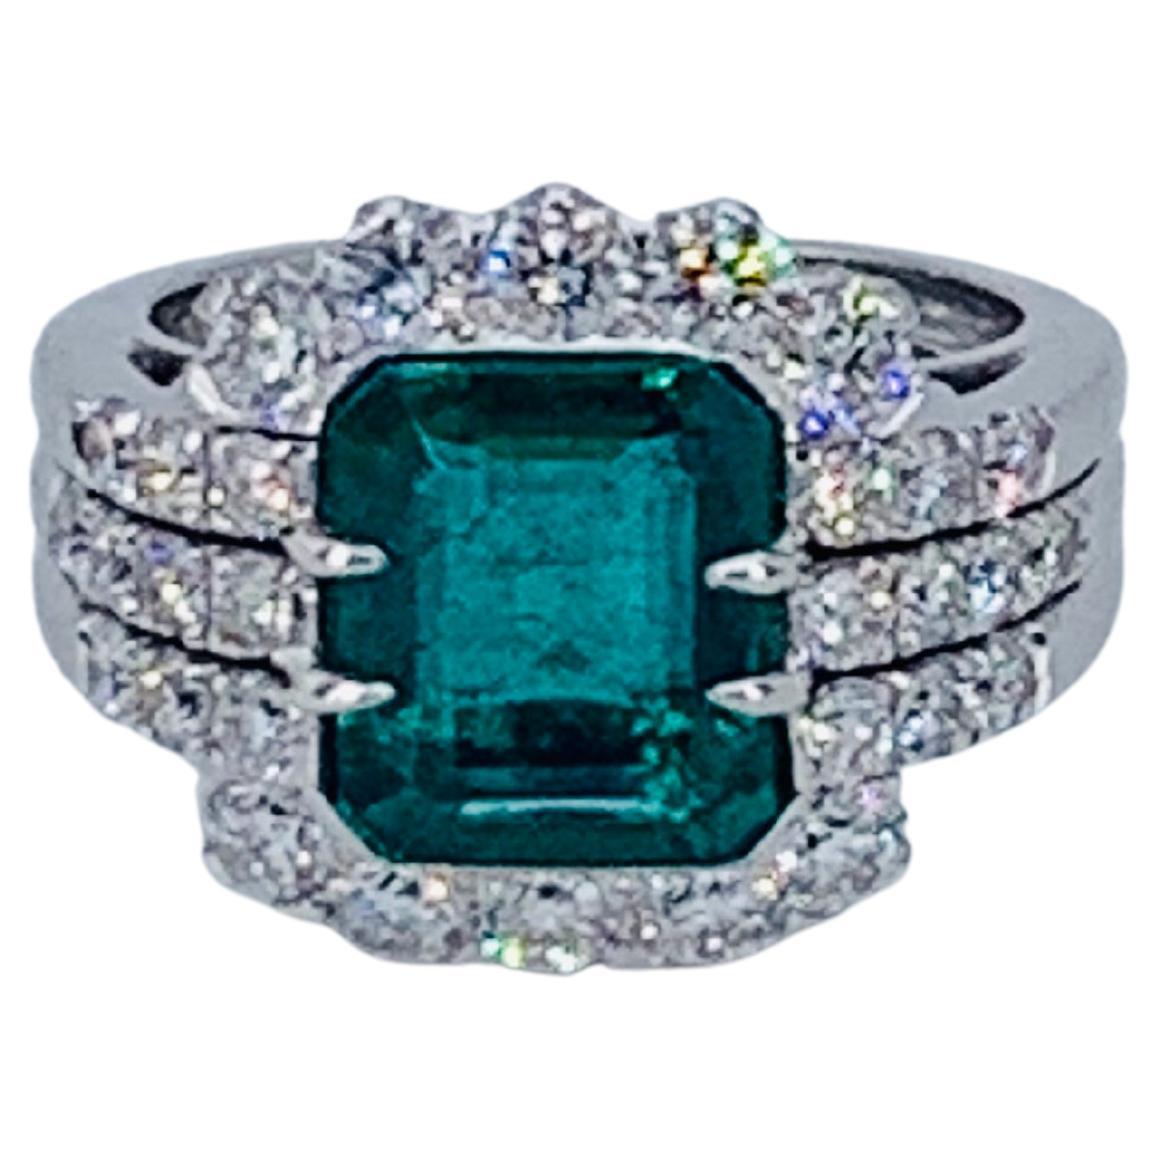 5.66 Carat Colombian Emerald Floral Designed Diamond Cocktail Ring